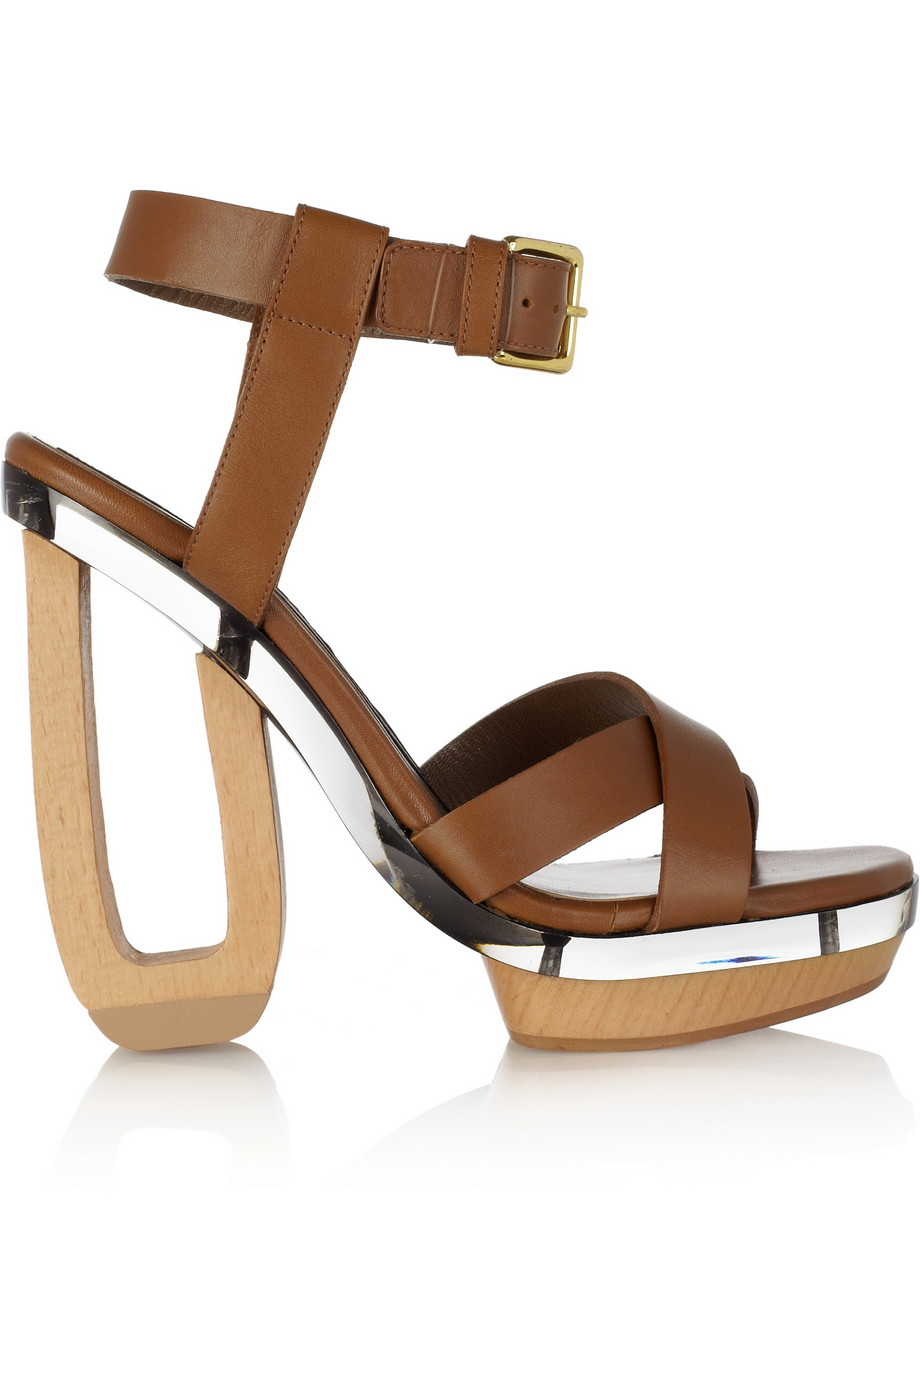 MARNI sandals made of leather, wood and plexiglass